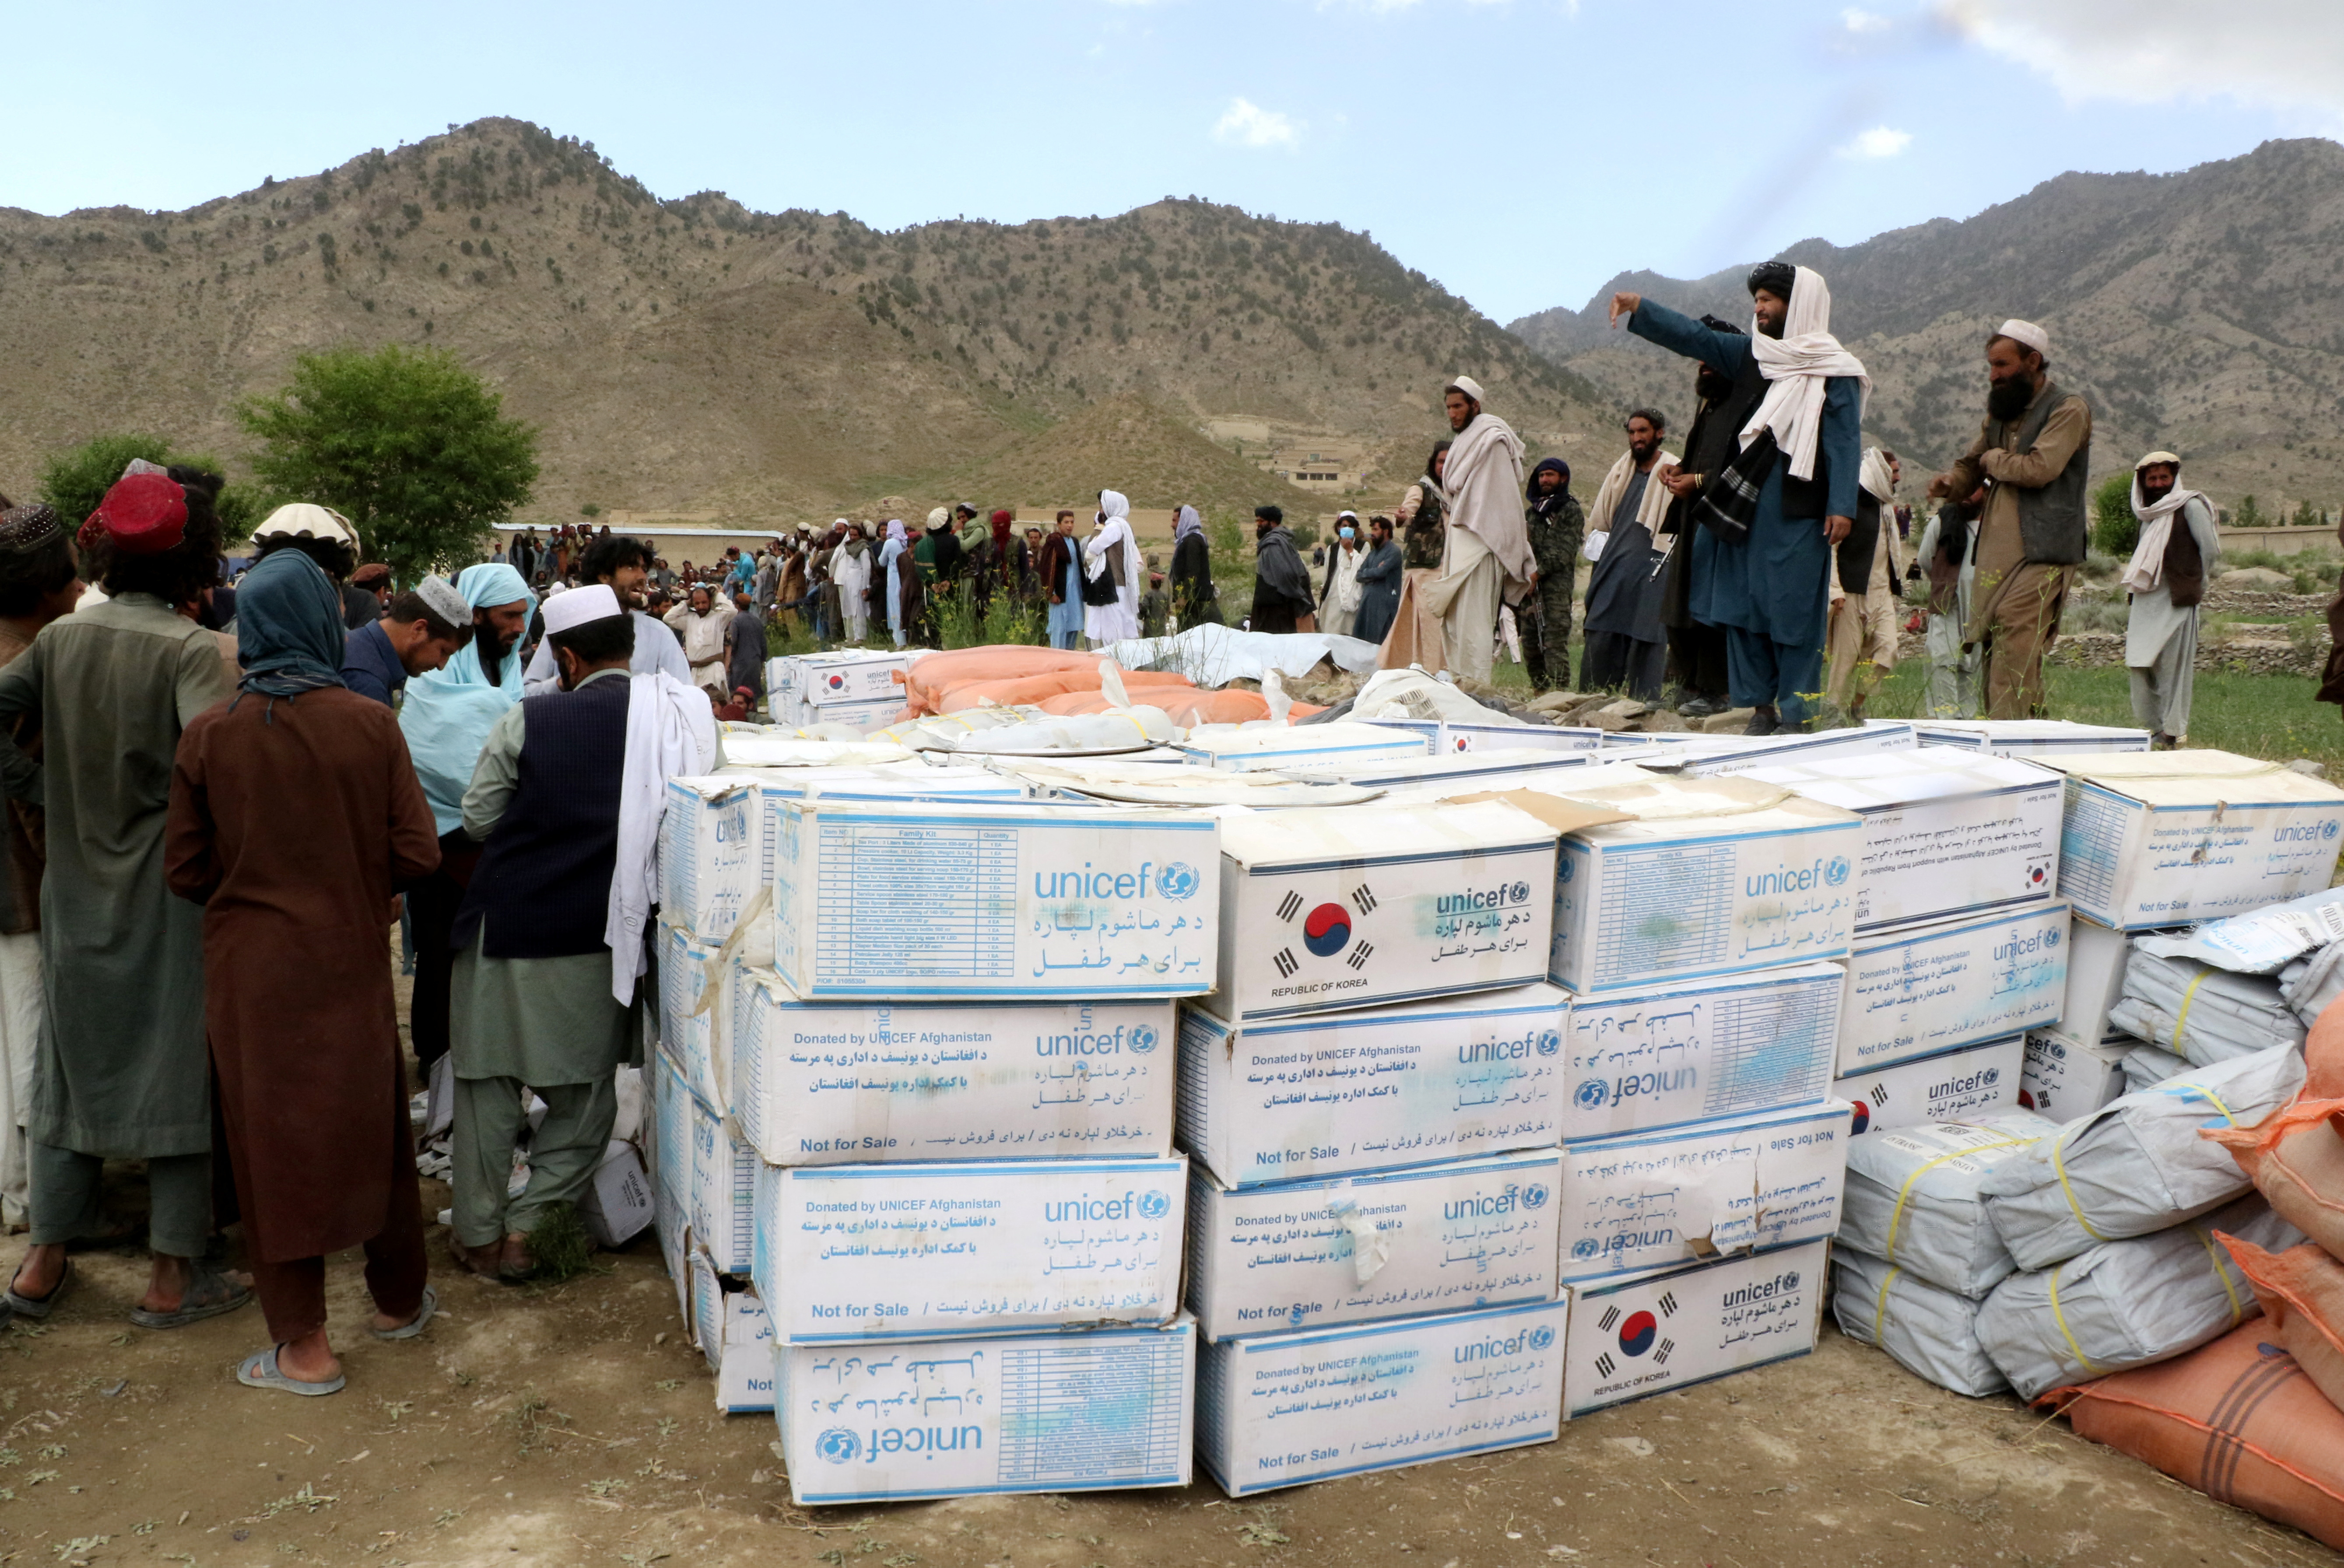 Afghan men gather to collect relief goods after a recent earthquake in Gayan